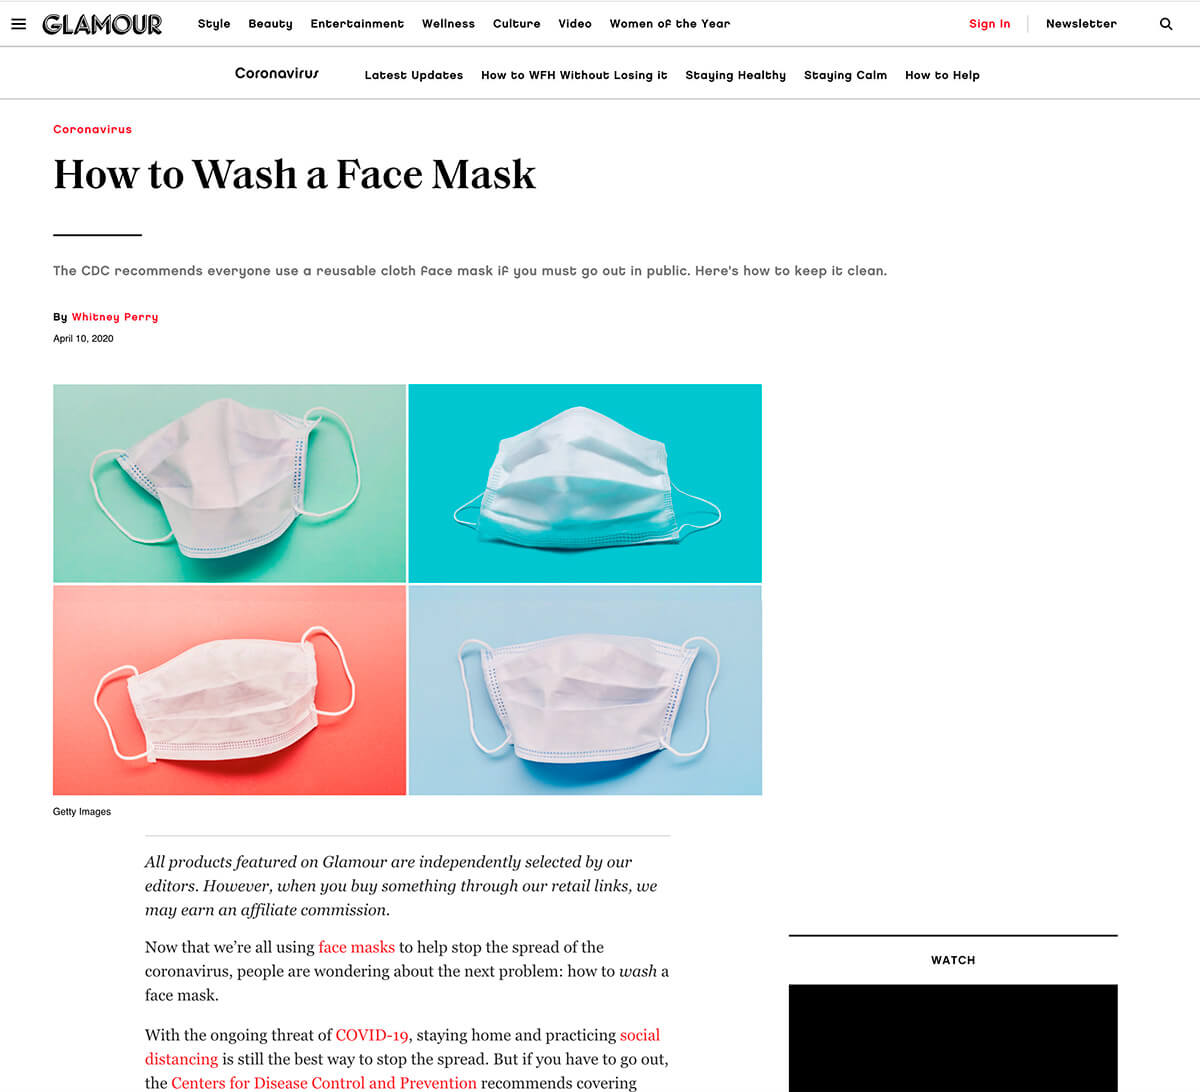 How to Wash a Face Mask